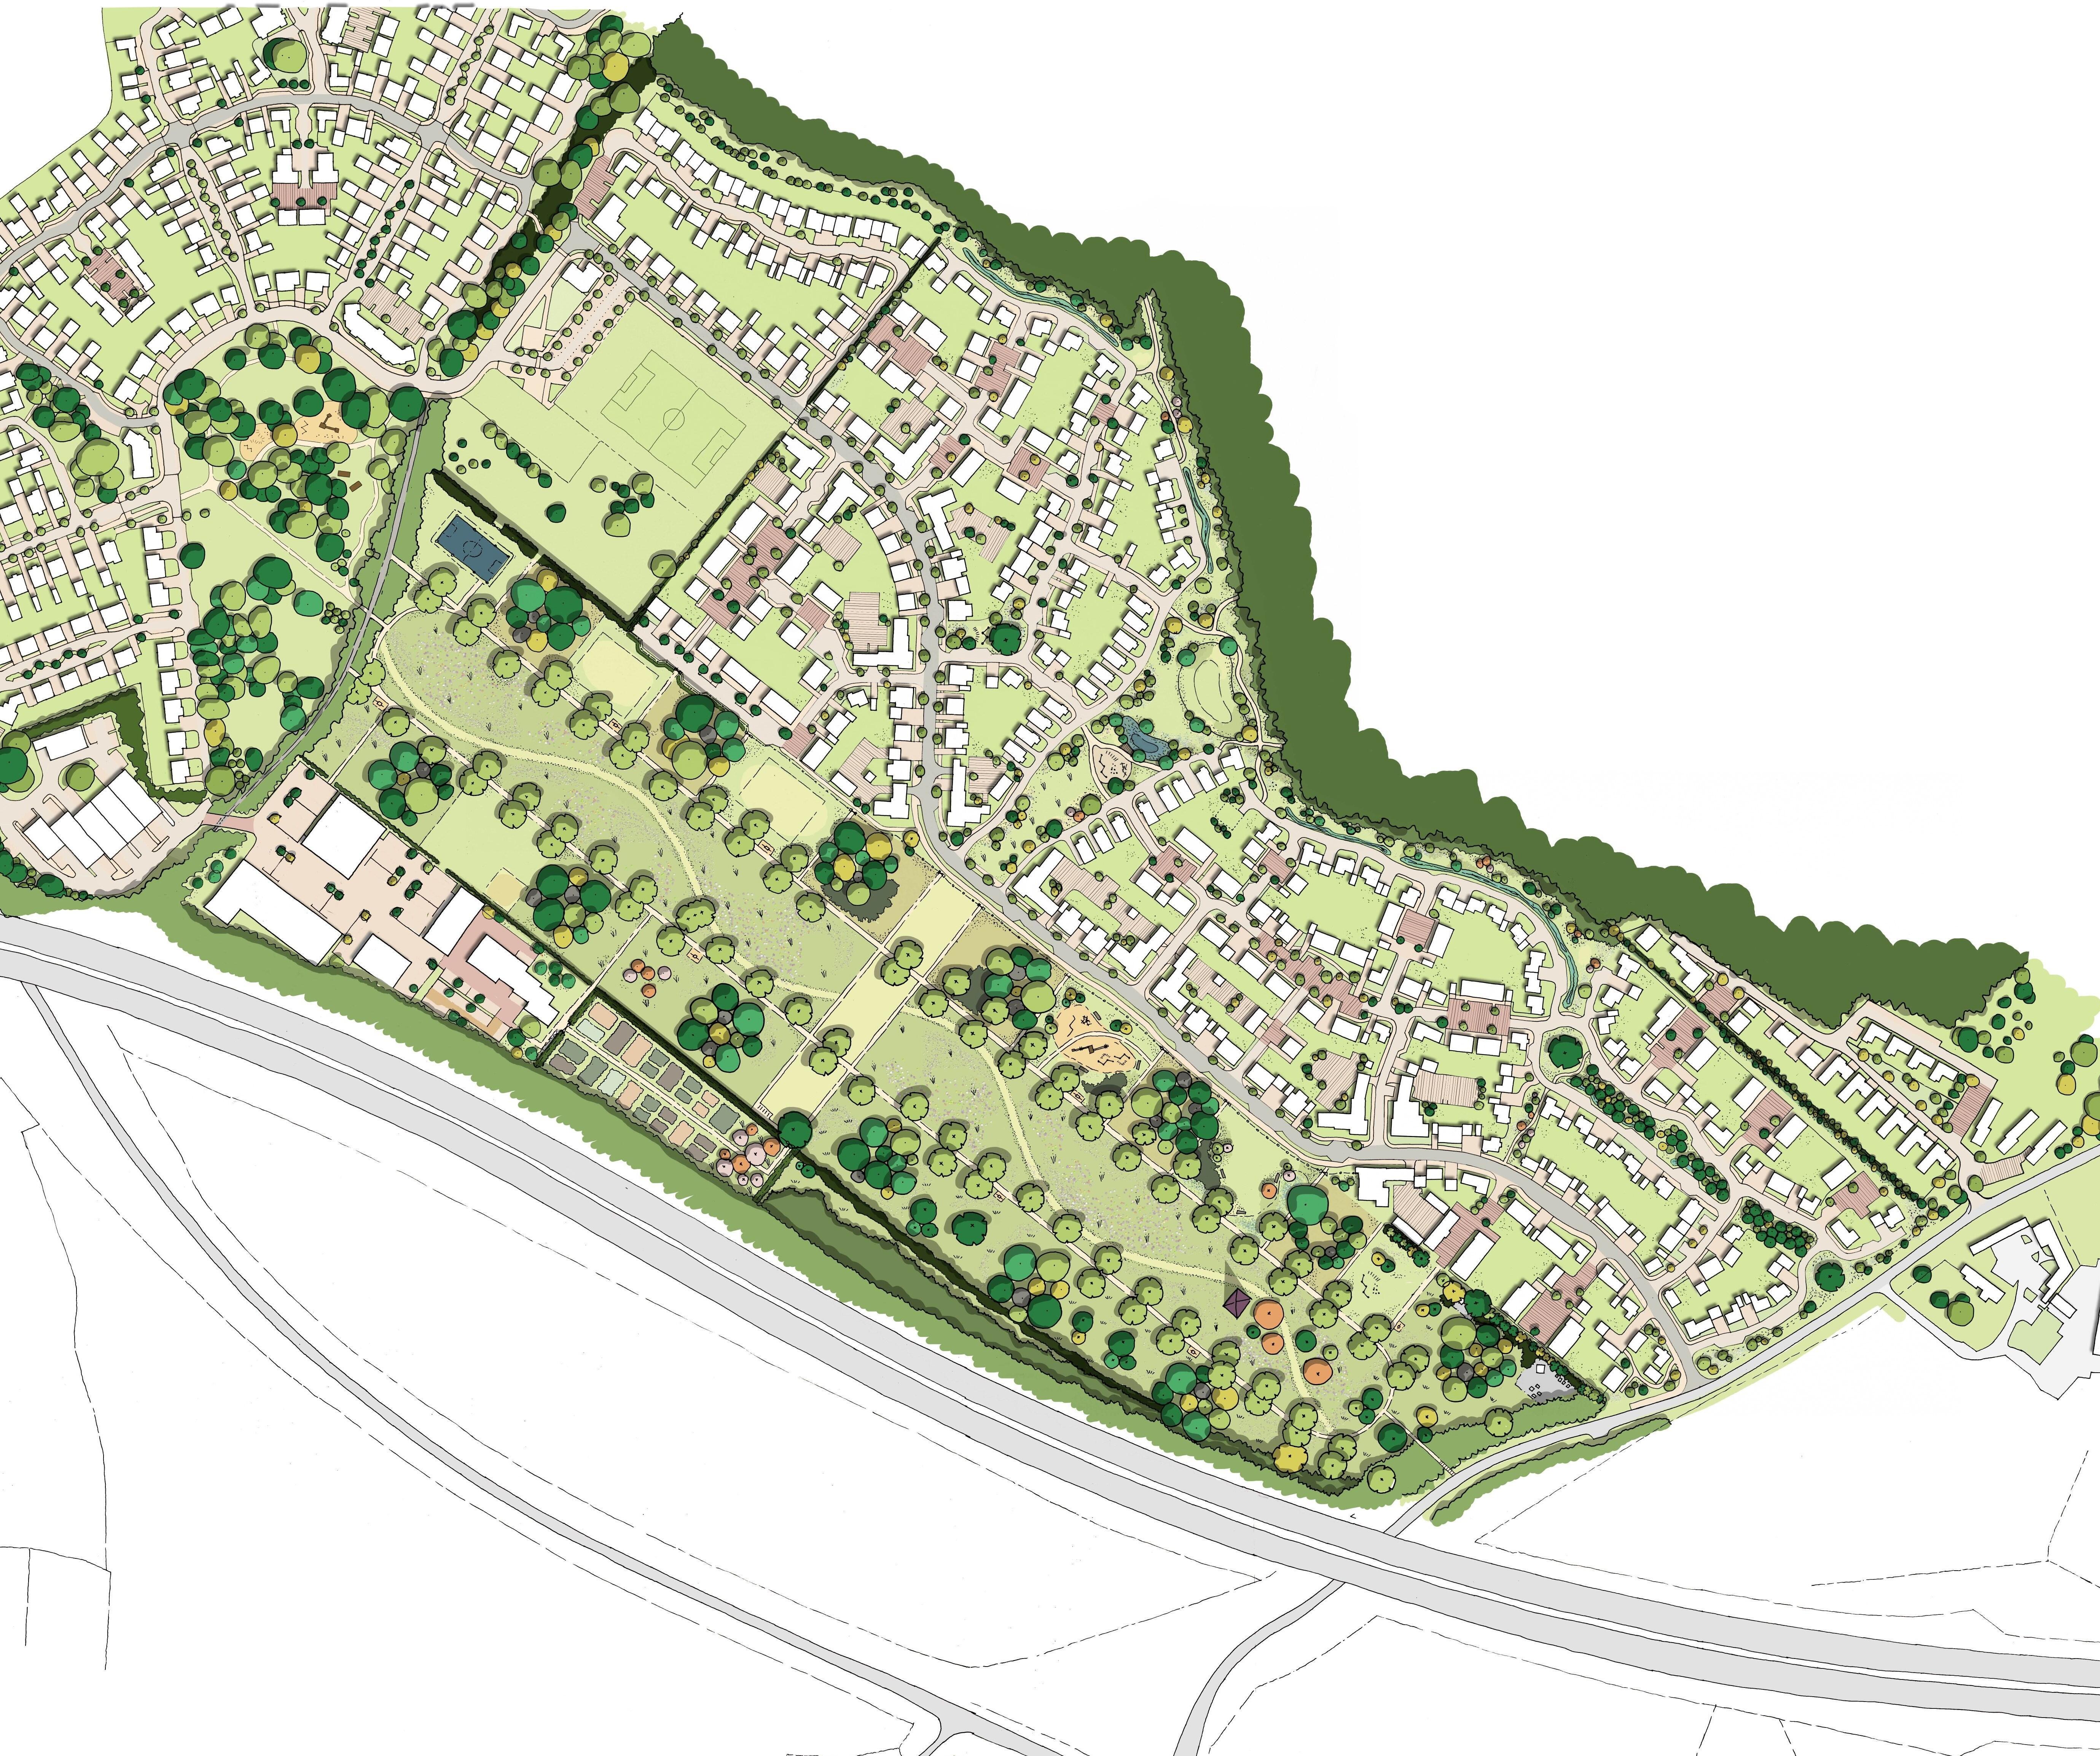 An illustrative masterplan showing the proposed development at Abbey Barn. © BMD